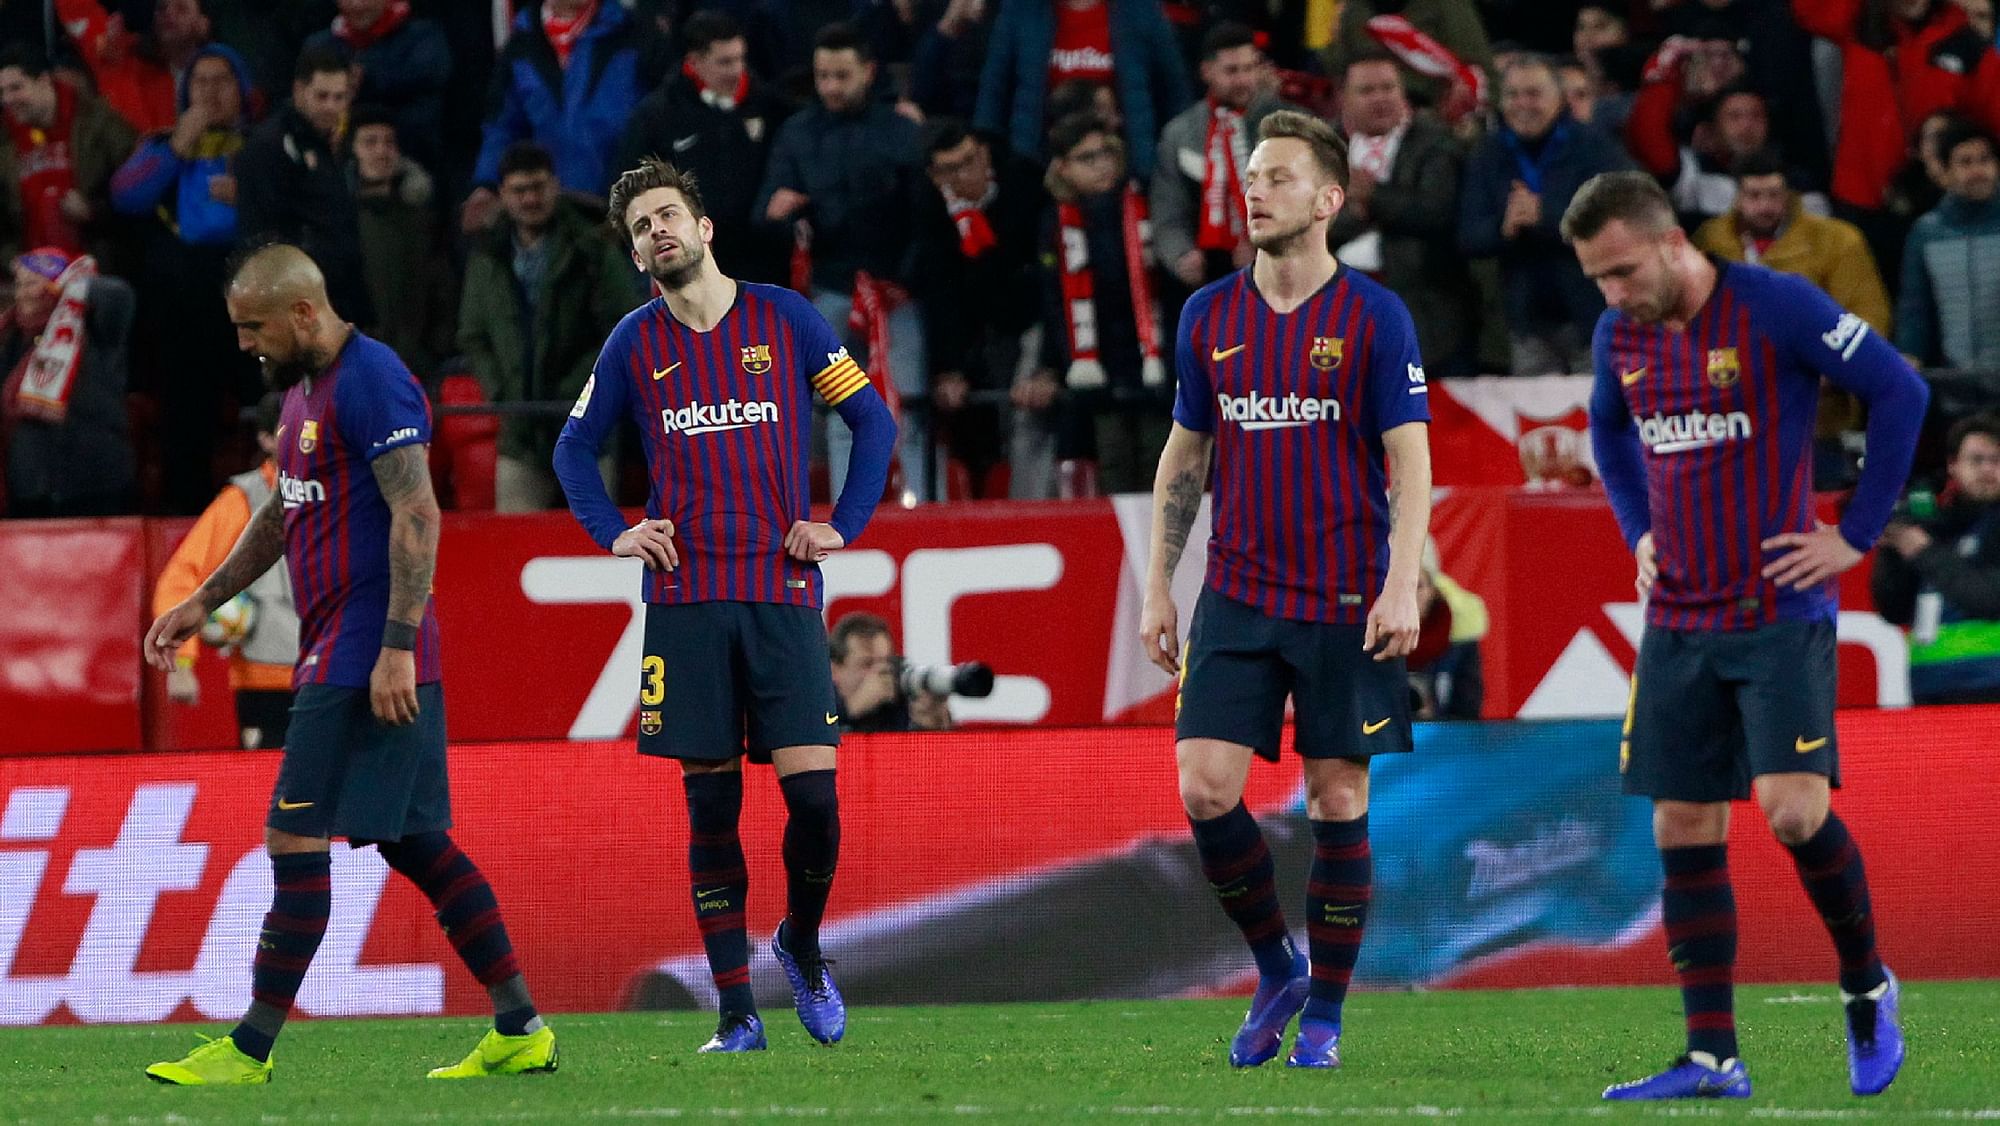 Barcelona players cut a dejected figure during their 2-0 loss to Sevilla in the first leg of the Copa del Rey quarter-finals.